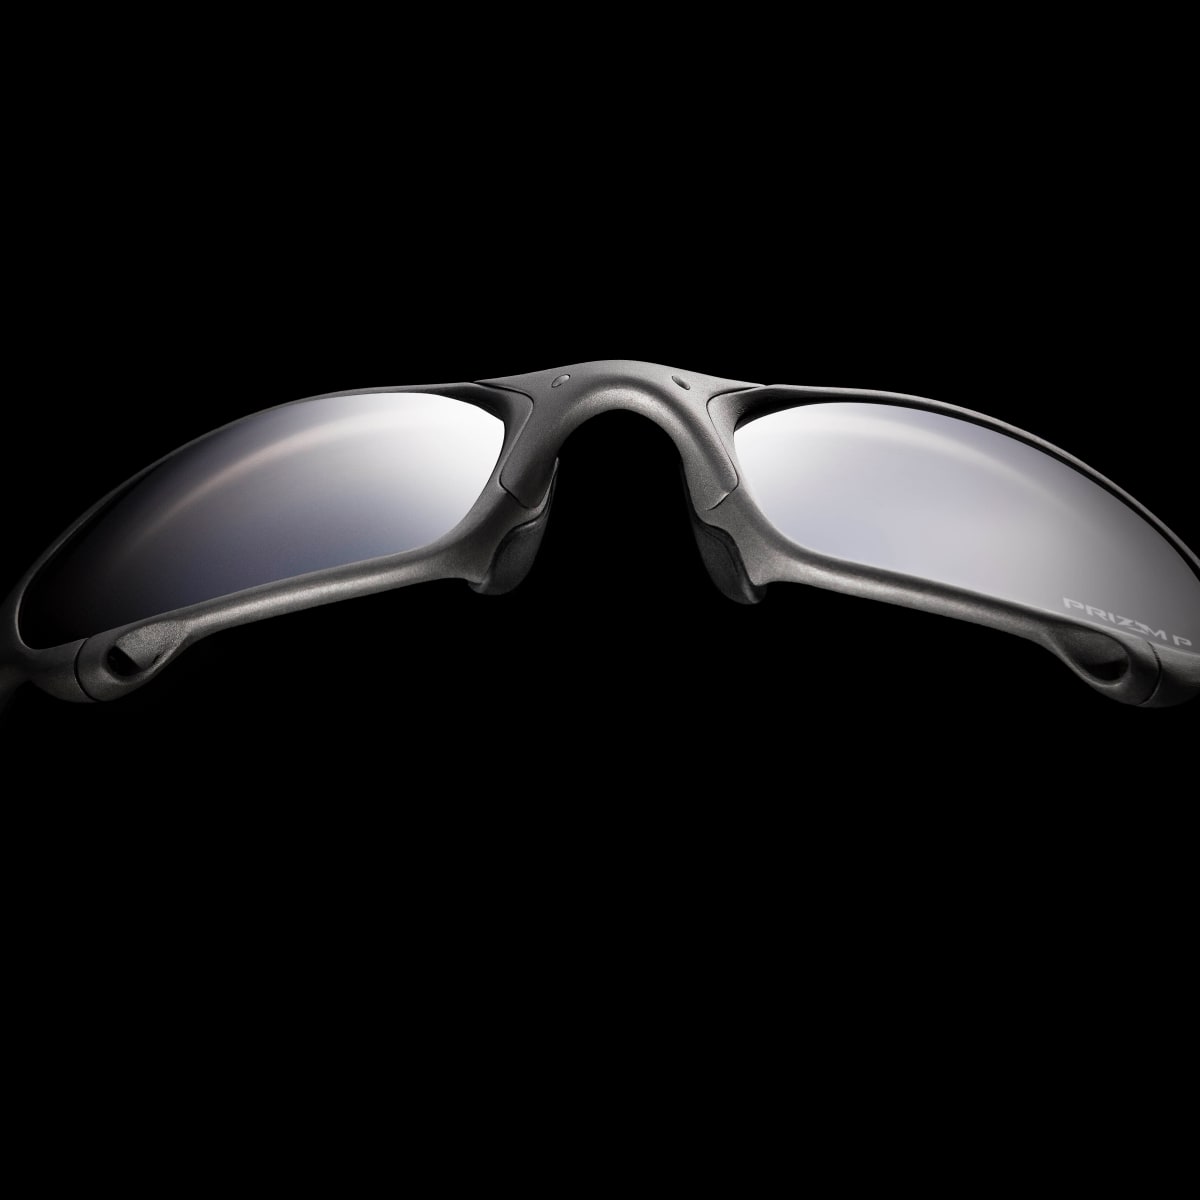 Oakley brings back its iconic X Metal frames in a new limited